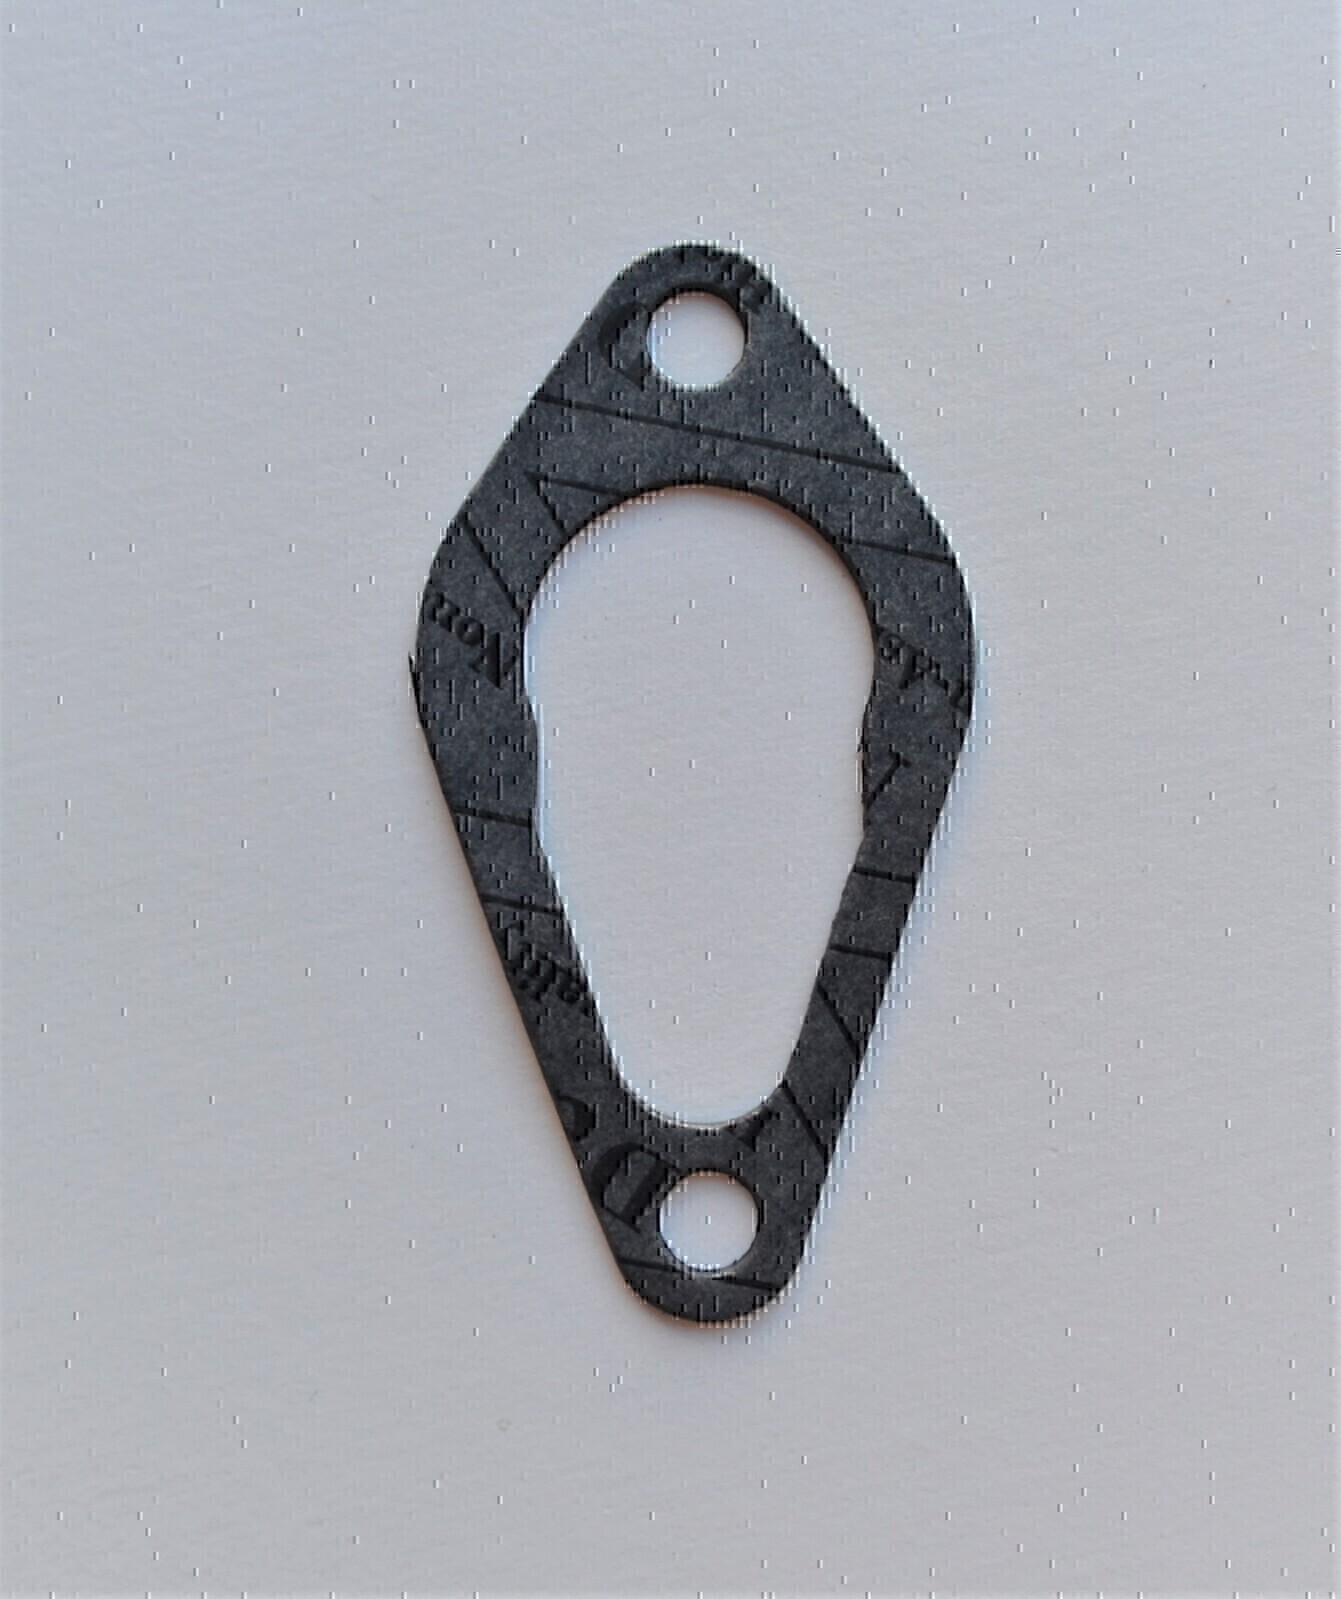 THERMOSTAT GASKET FOR MERCURY MARINER TOHATSU 25HP 30HP OUTBOARD MOTOR